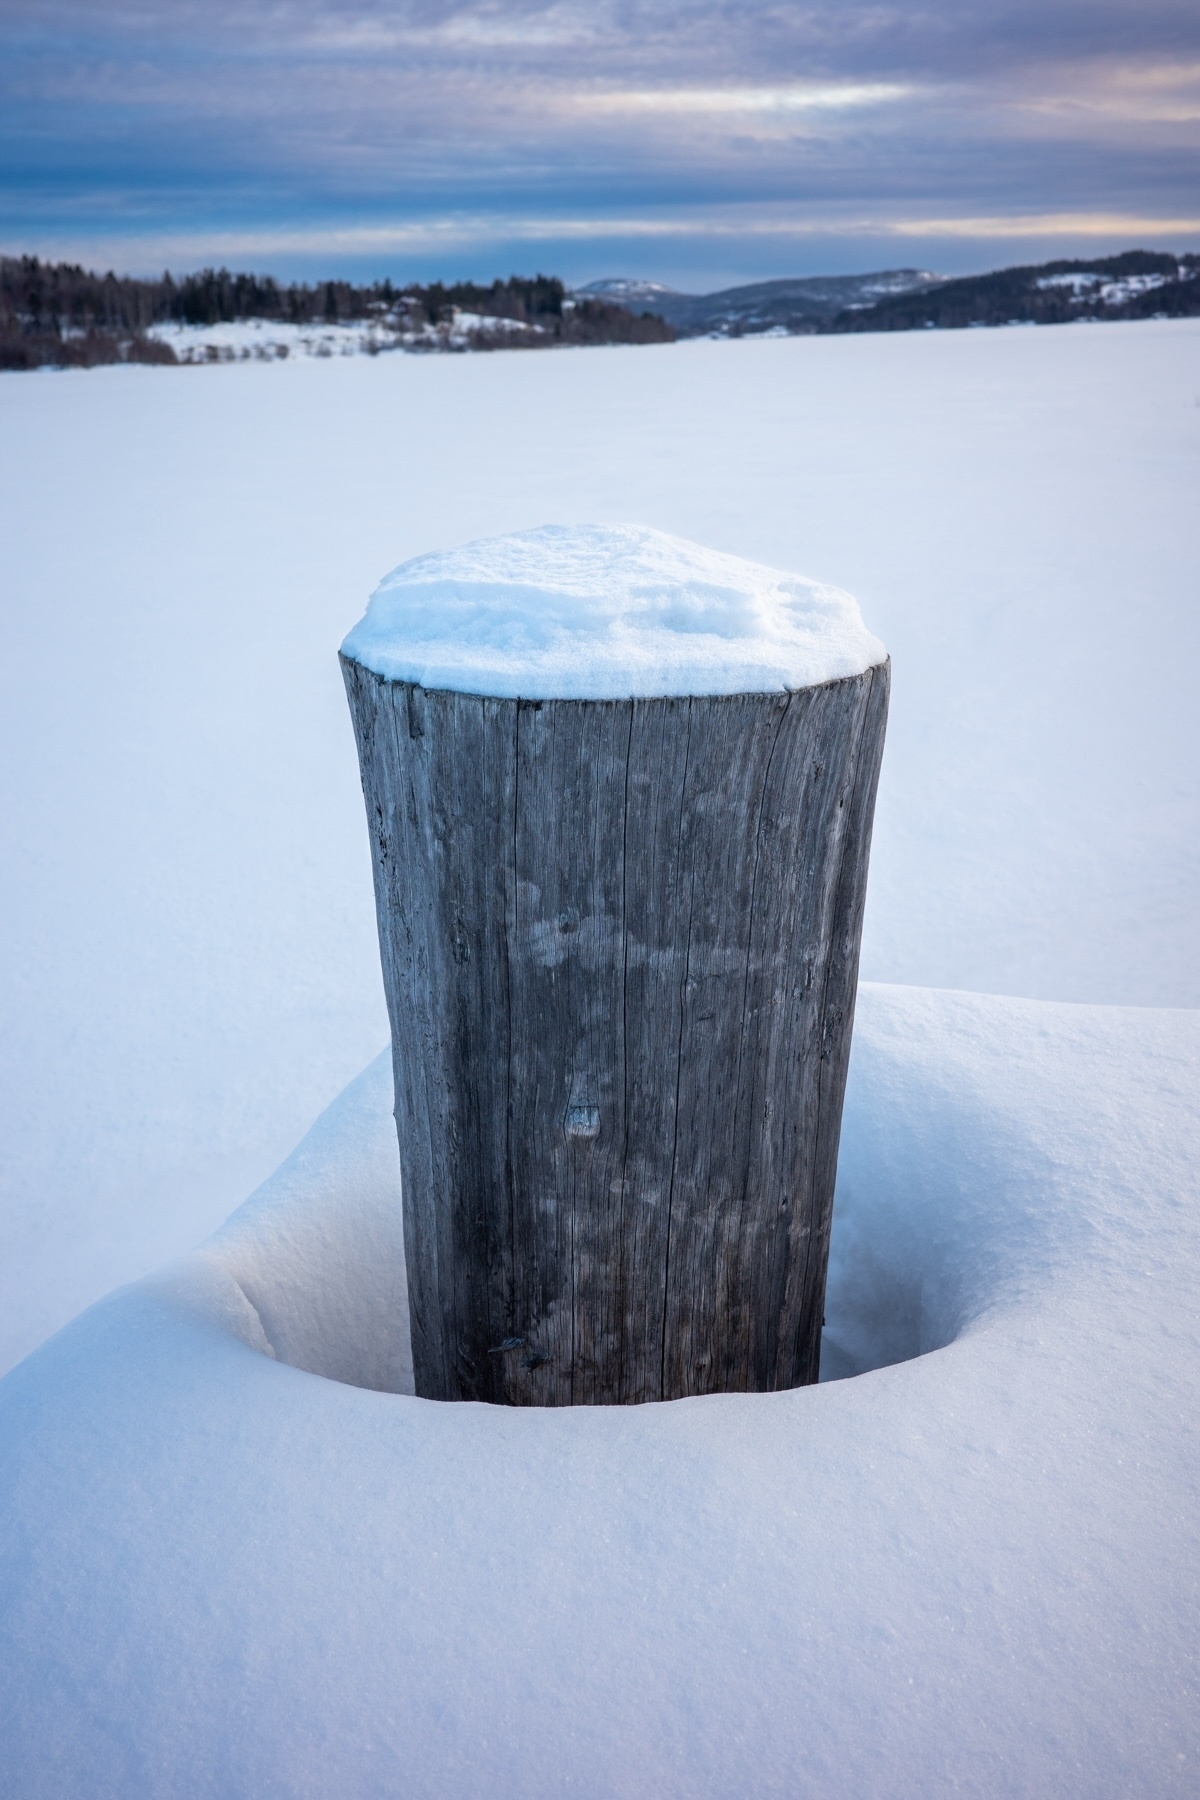 A wooden post with a cap of snow stands in the foreground against a wintery landscape with snow-covered ground and a backdrop of trees and hills under a cloudy sky.